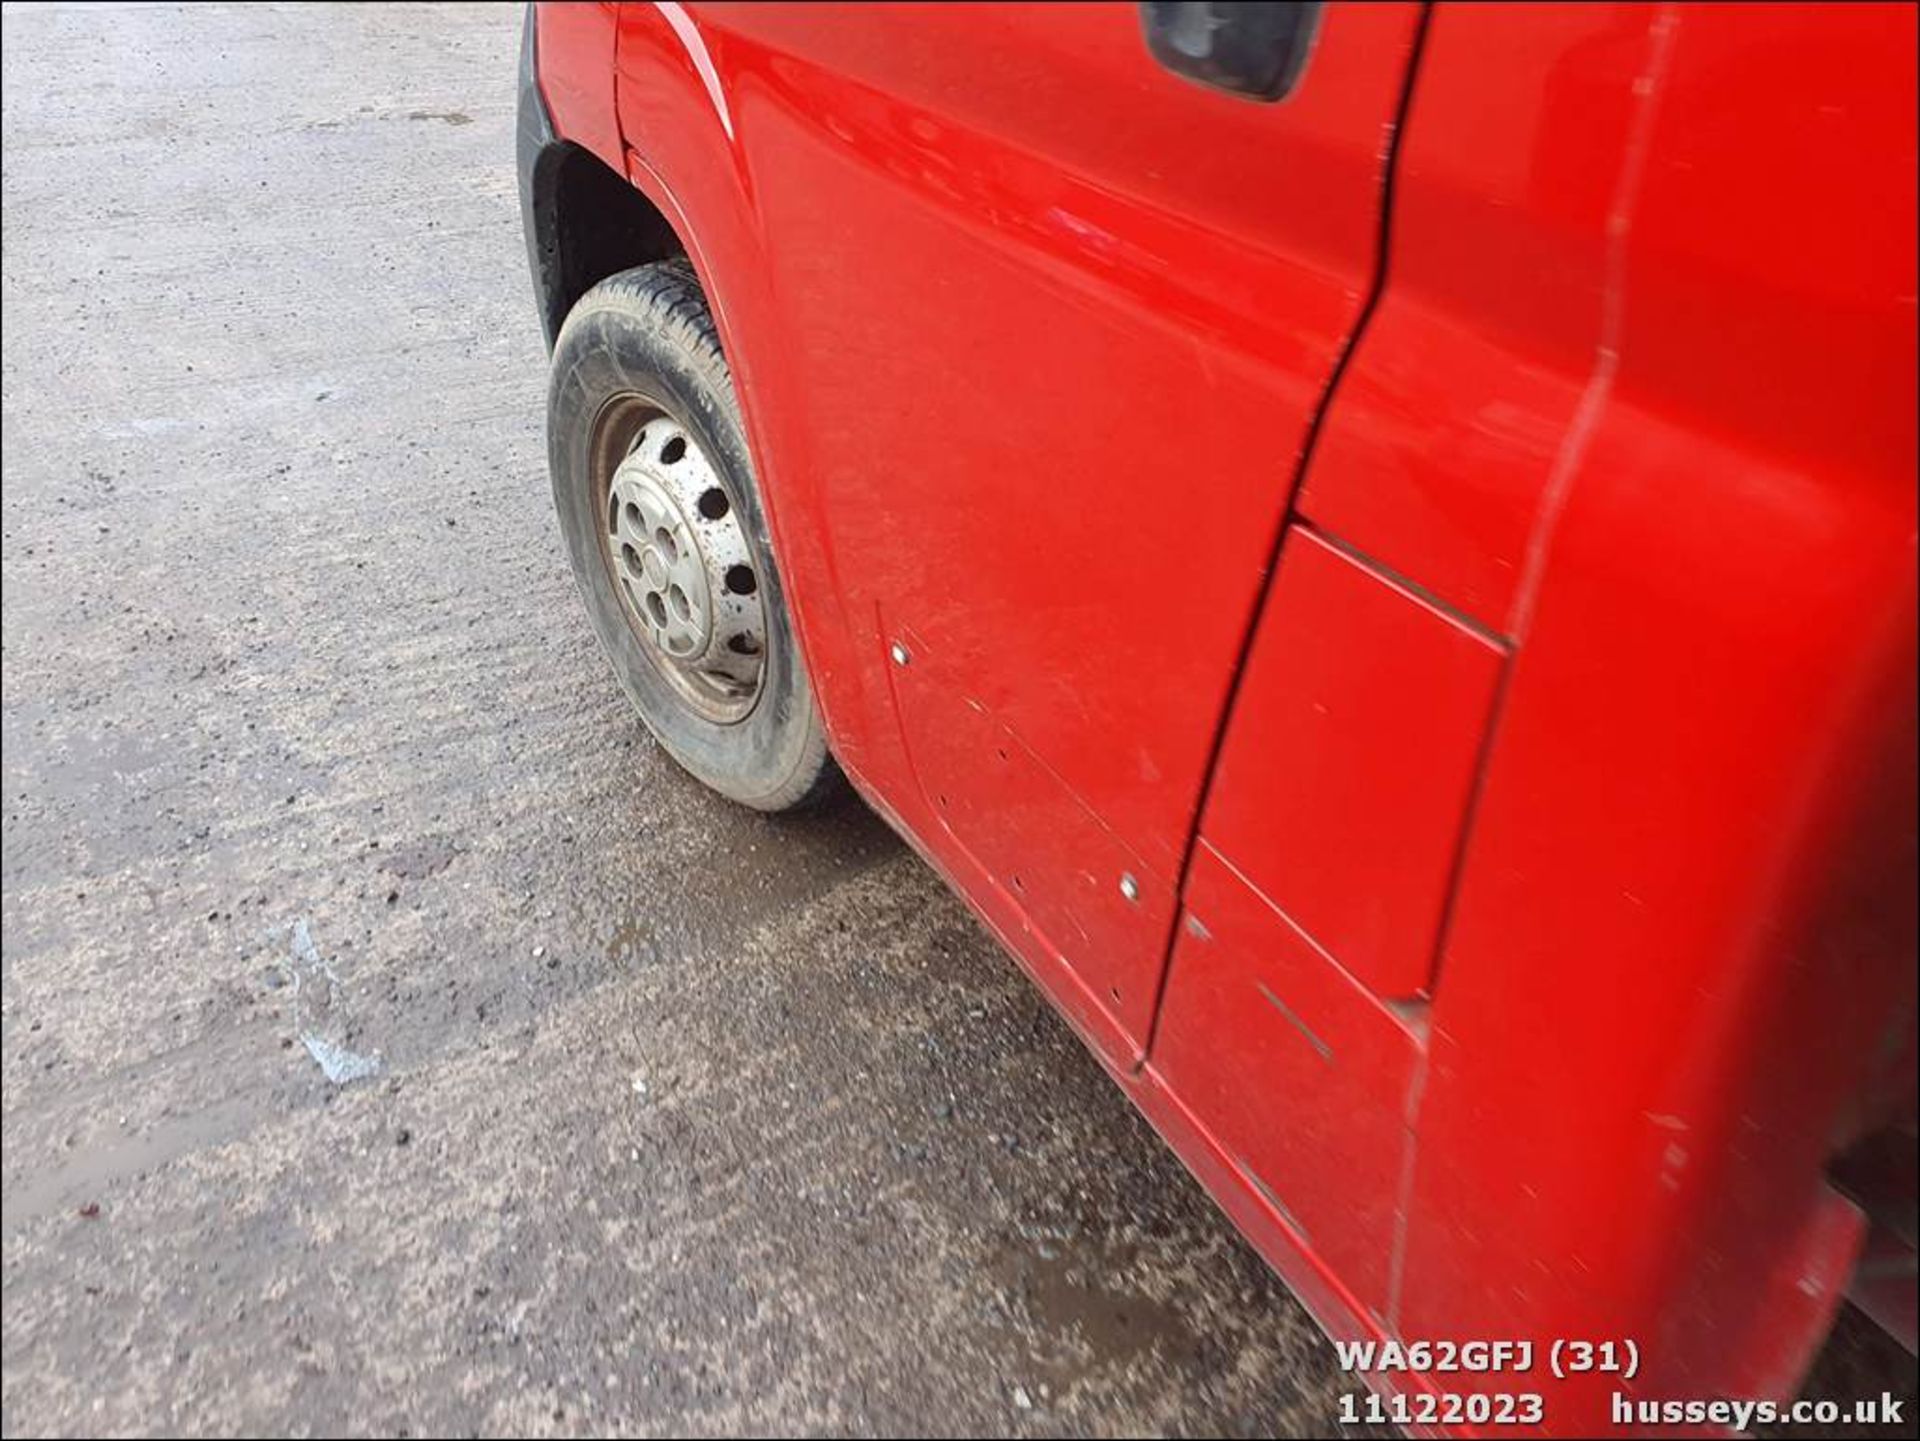 12/62 FIAT DUCATO 35 MULTIJET - 2287cc 2.dr Flat Bed (Red) - Image 32 of 52